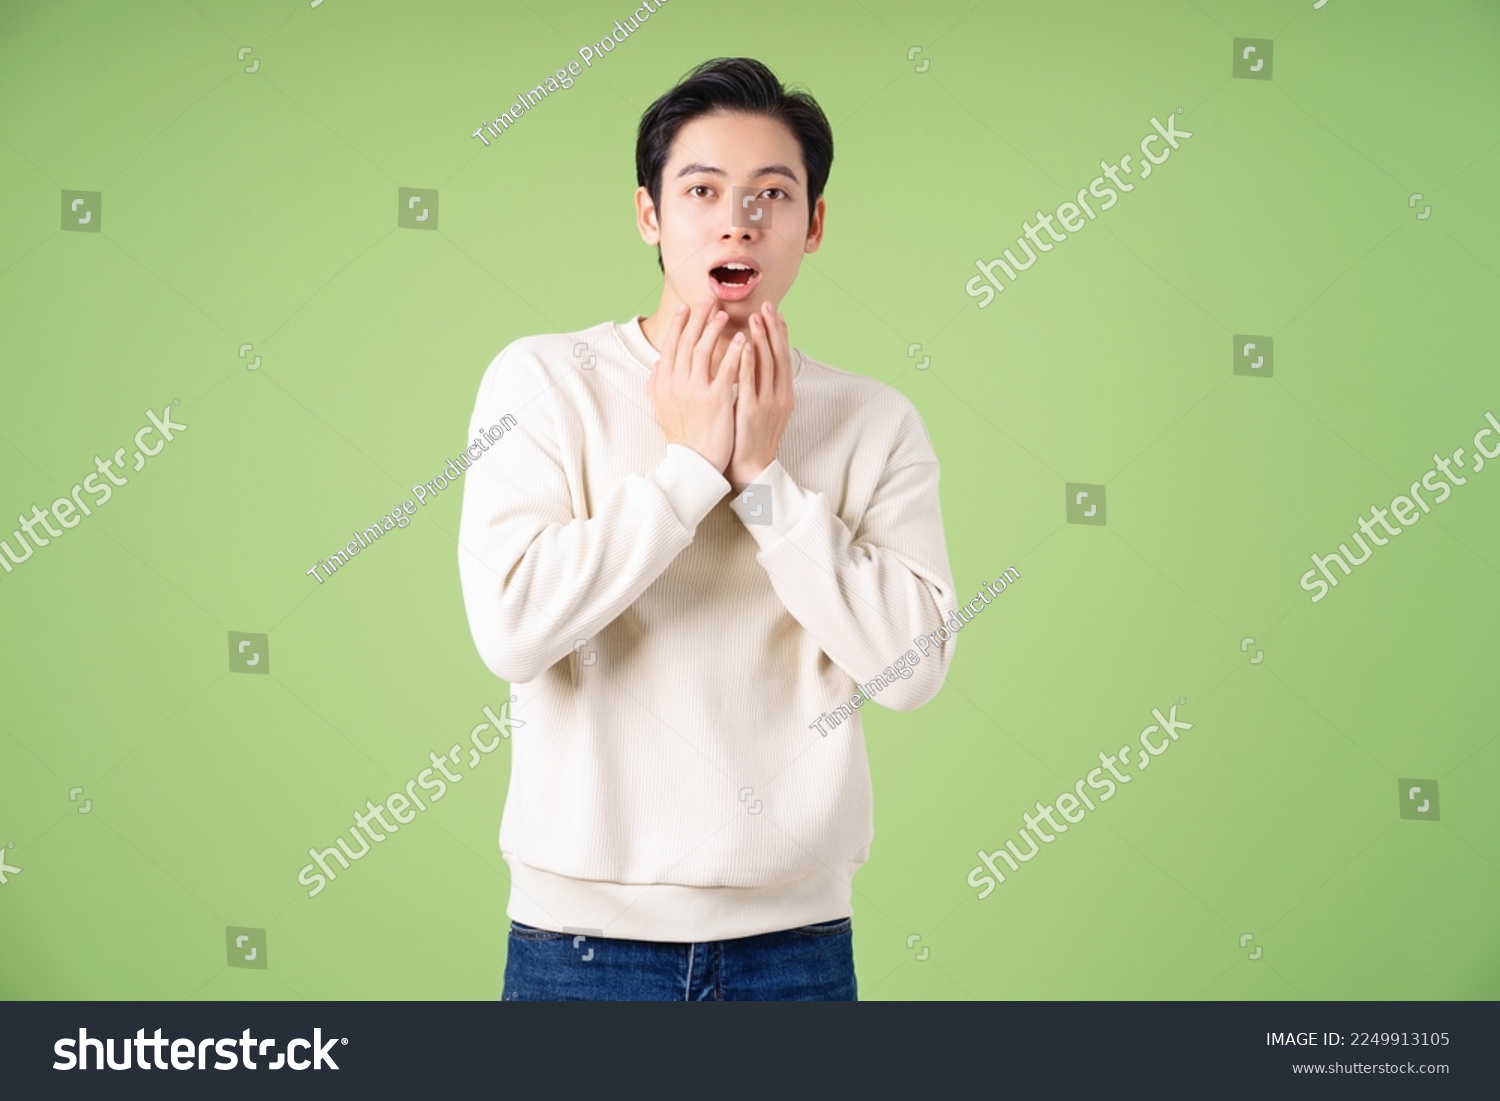 Portrait of young Asian man posing on green background #2249913105